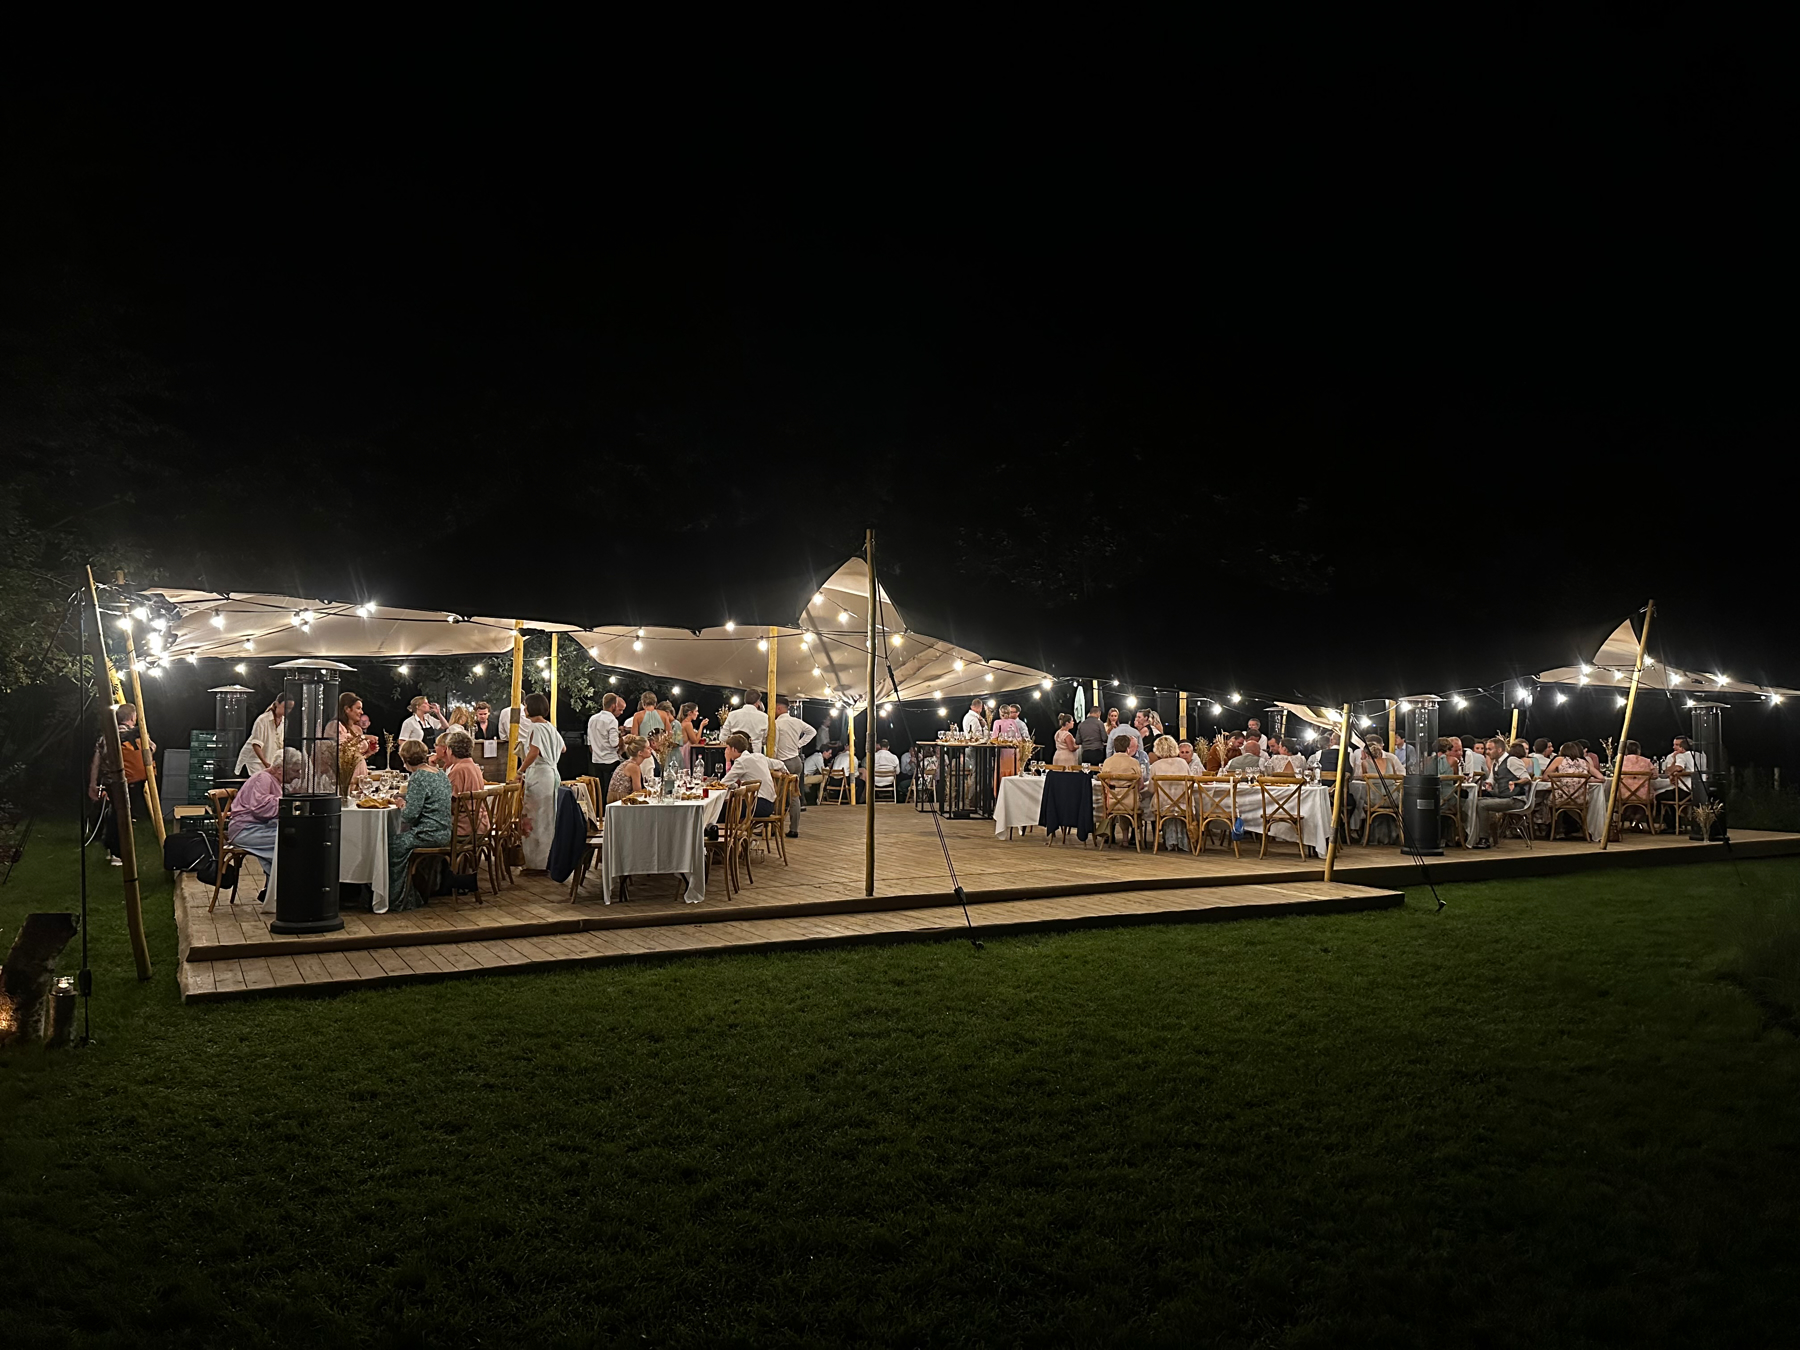 A large white, open tent, beautifully decorated with lights in a dark night